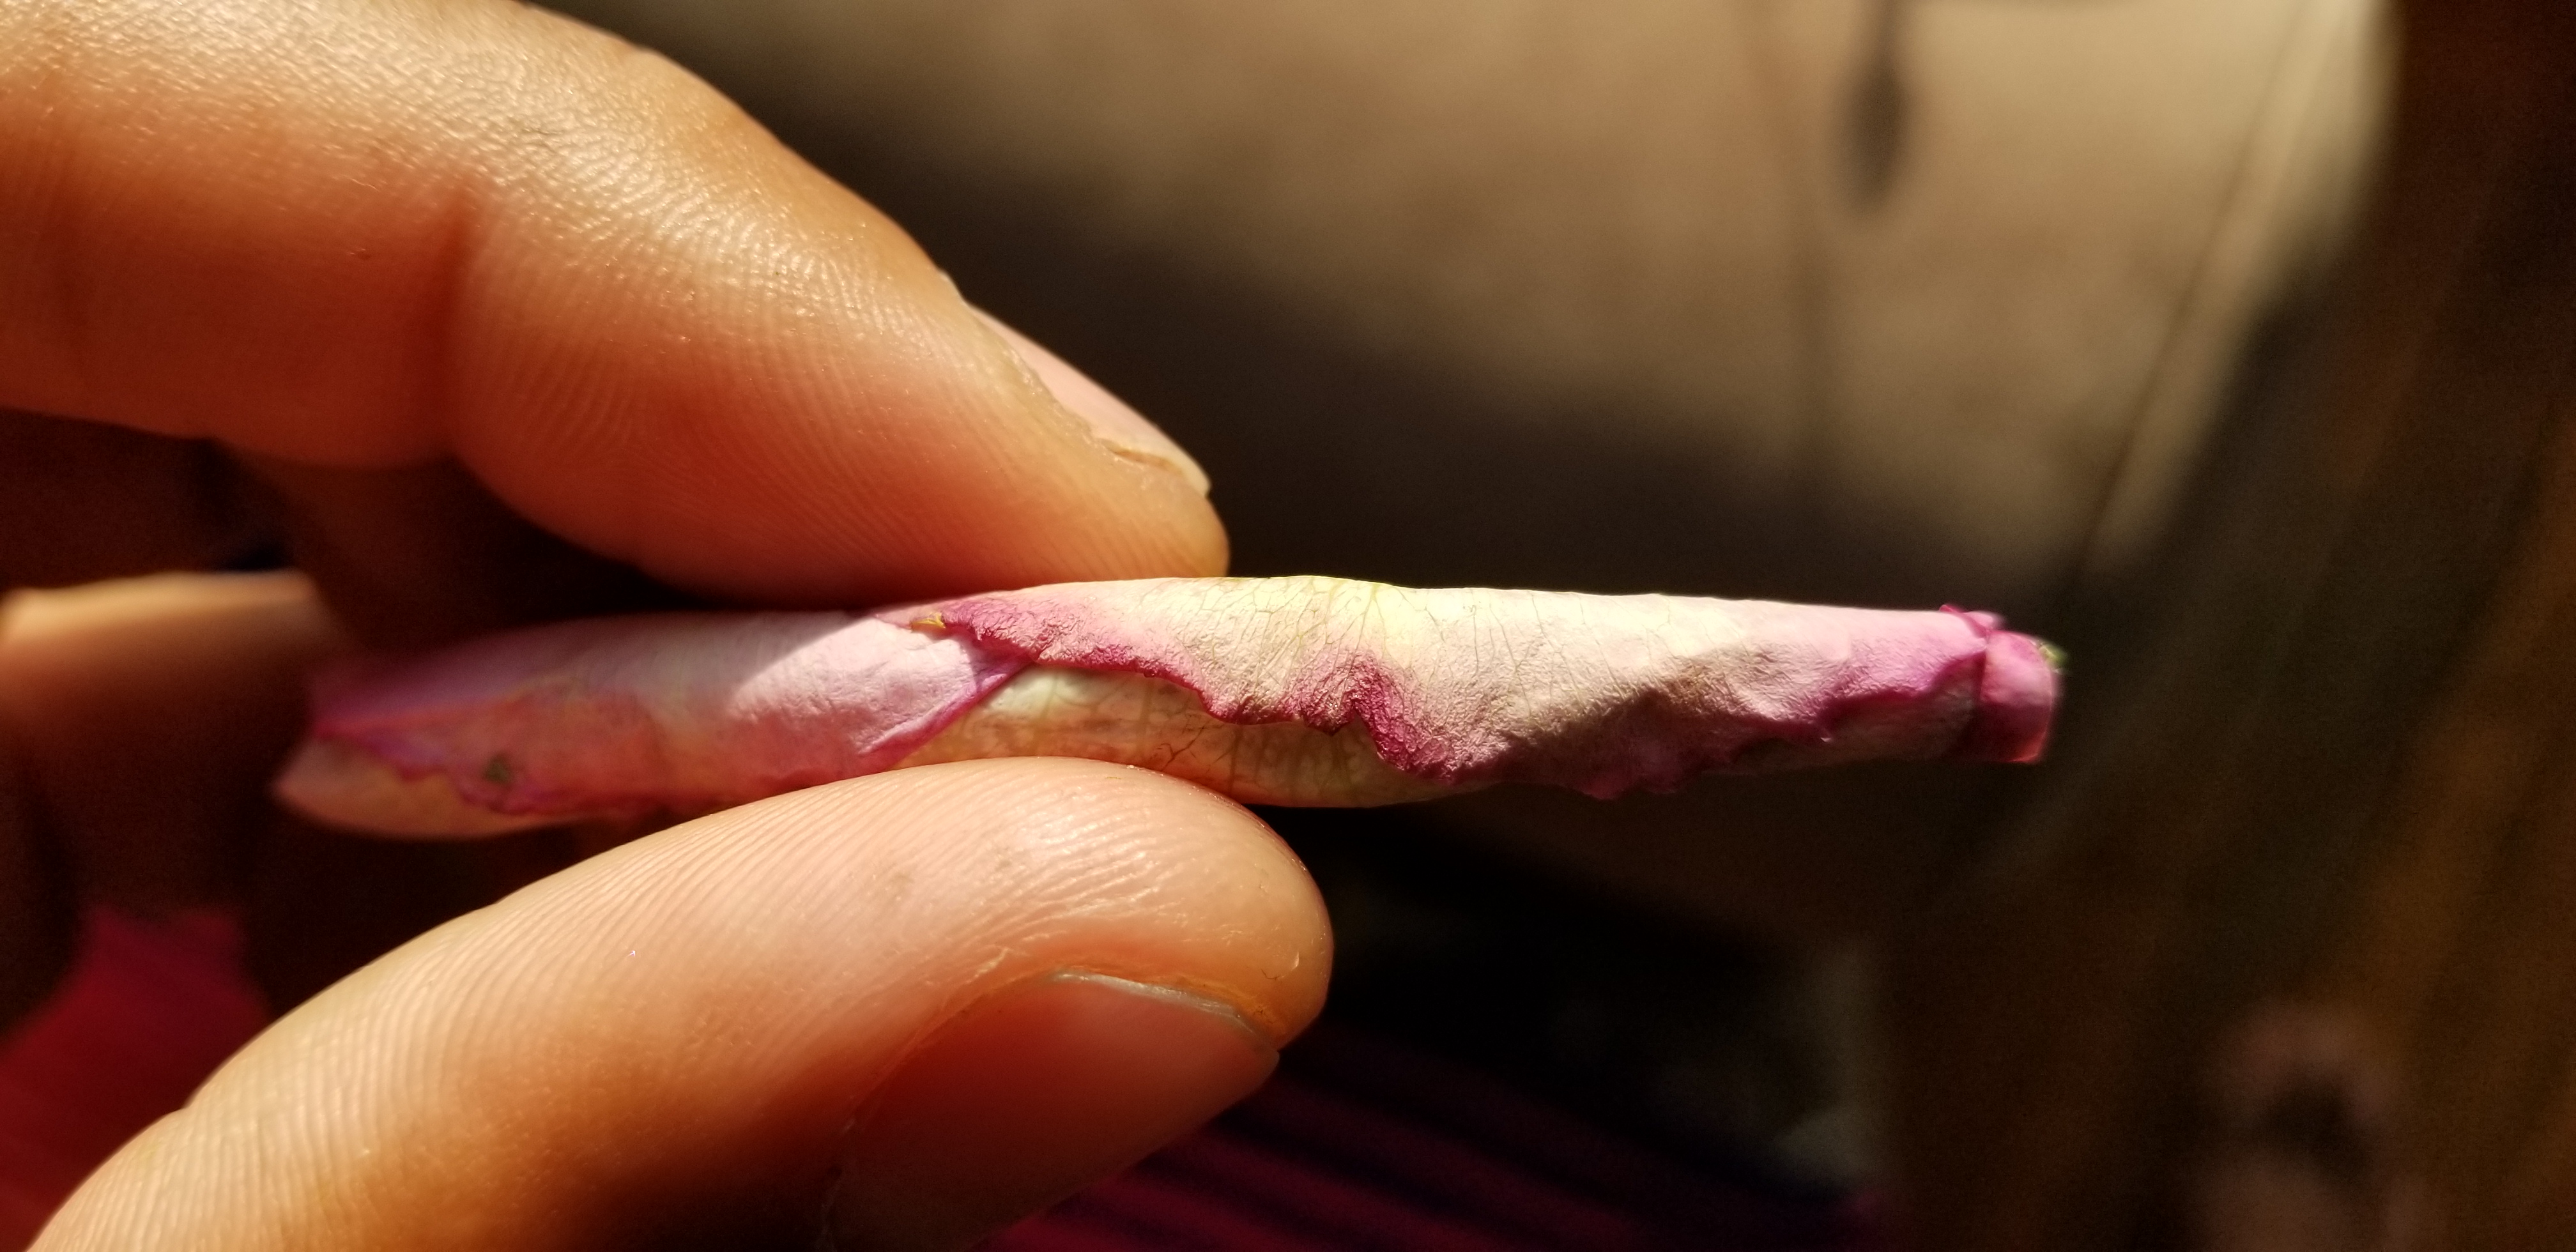 Cannabis City: How to Roll a Rose Blunt ~ L.A. TACO